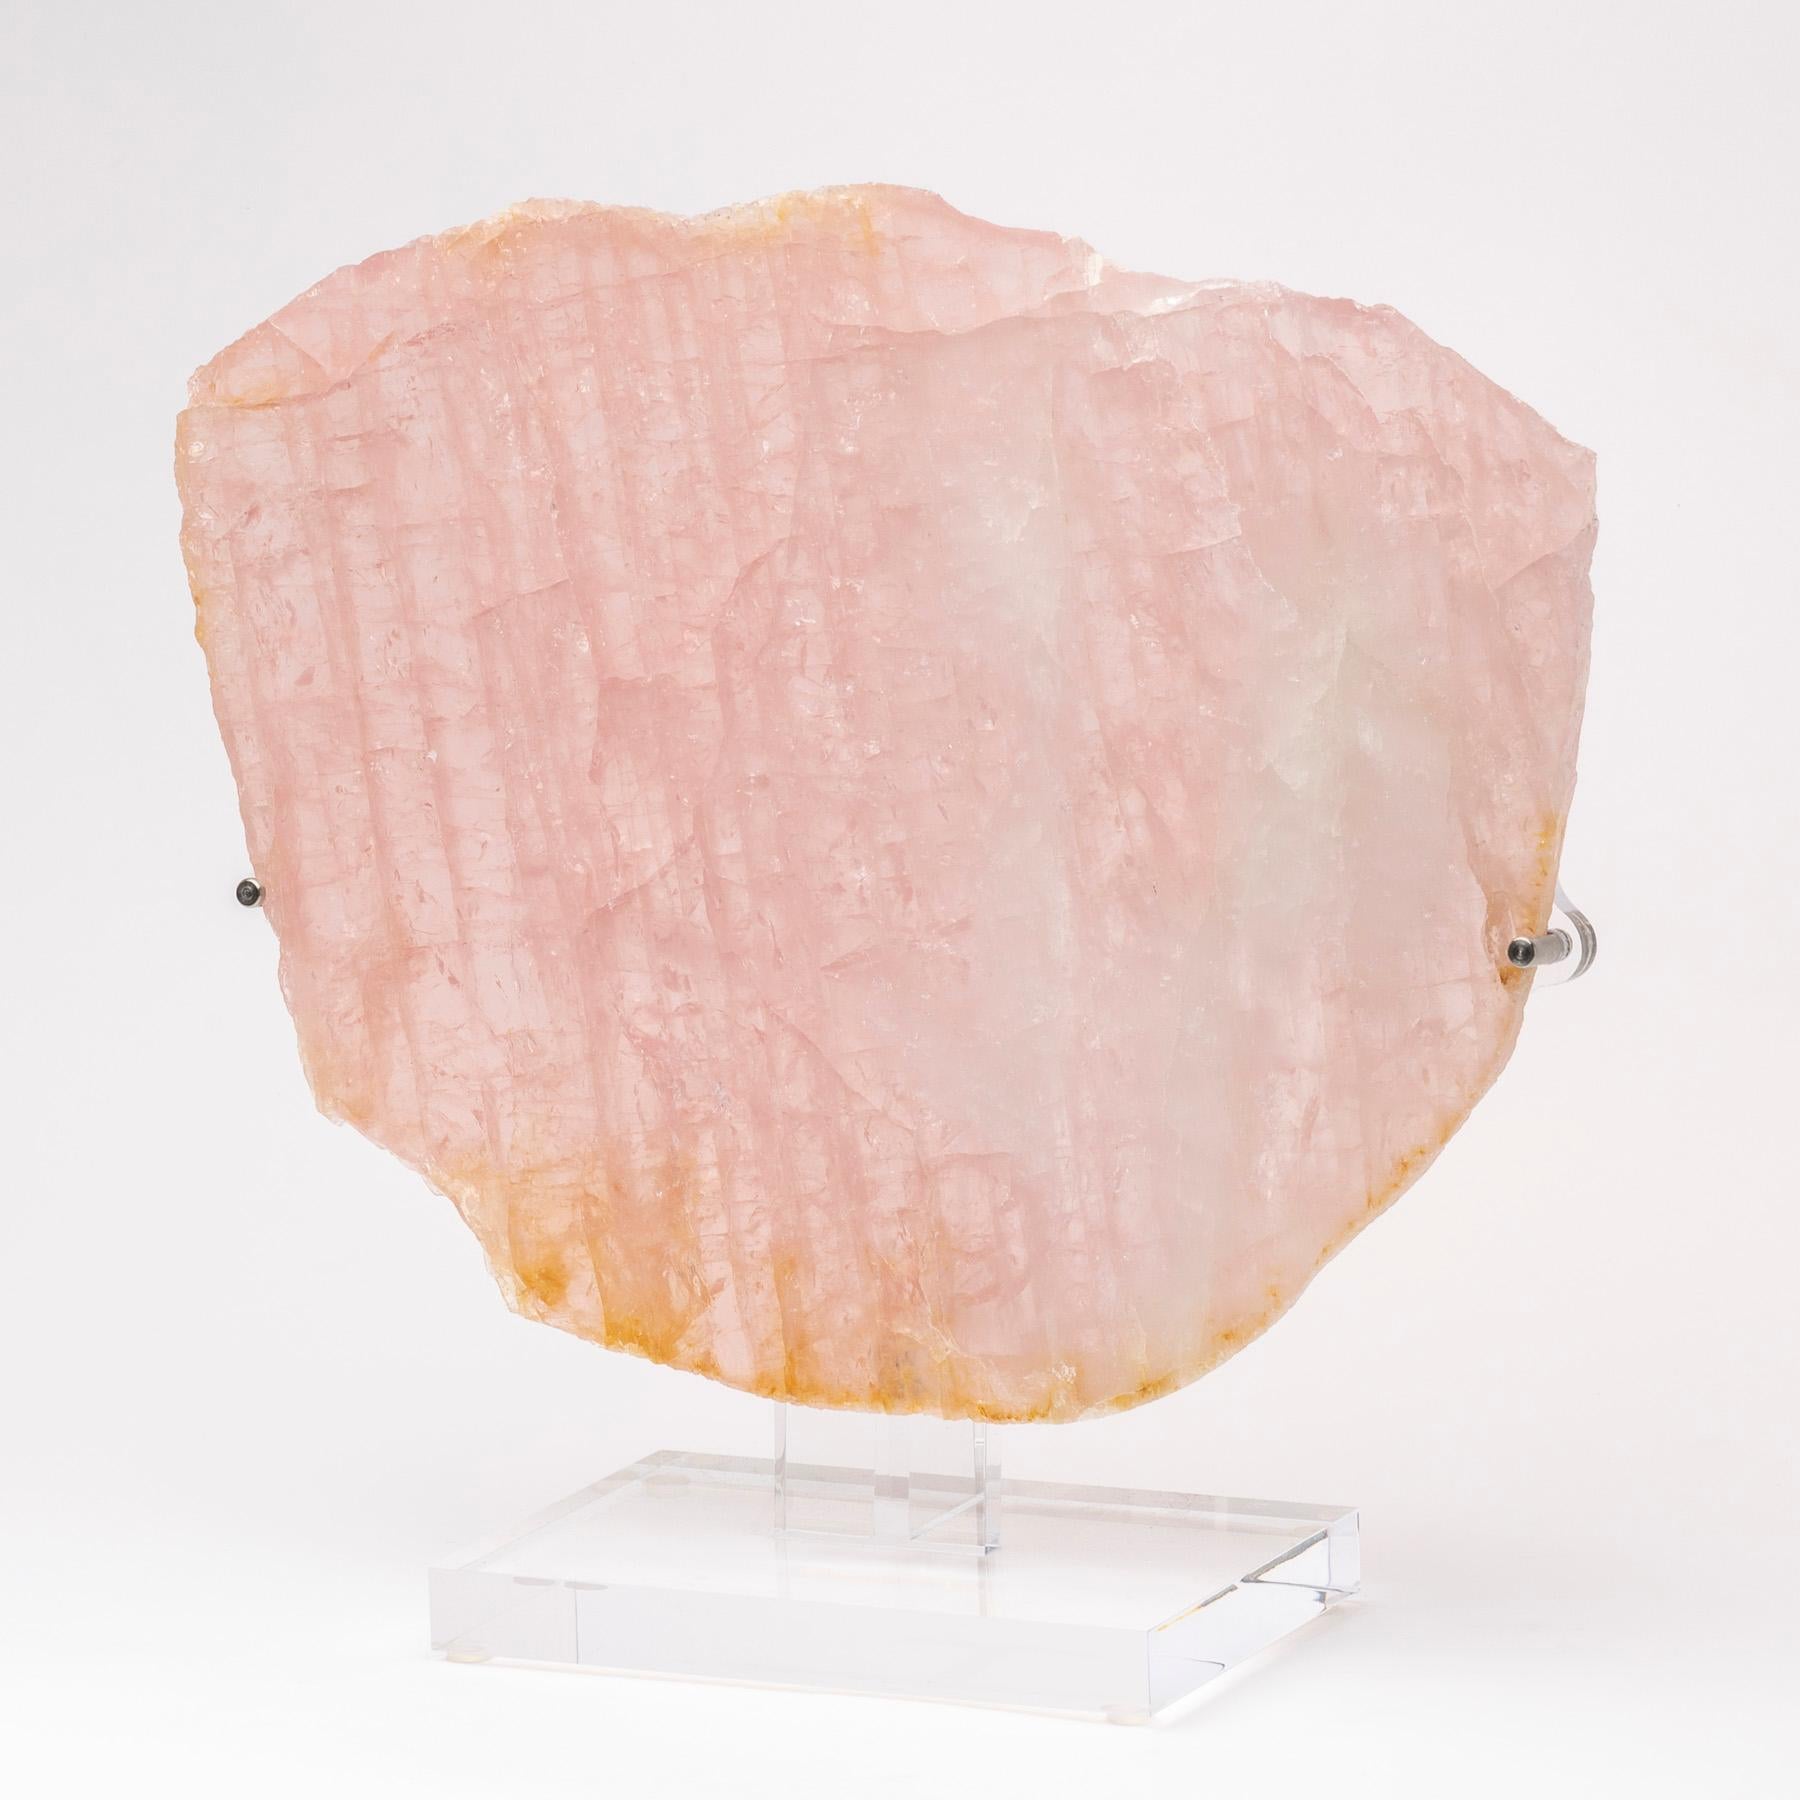 Beautiful natural shape Brazilian rose quartz 
The base is original and organic designed to fit and enhance the slab perfectly.